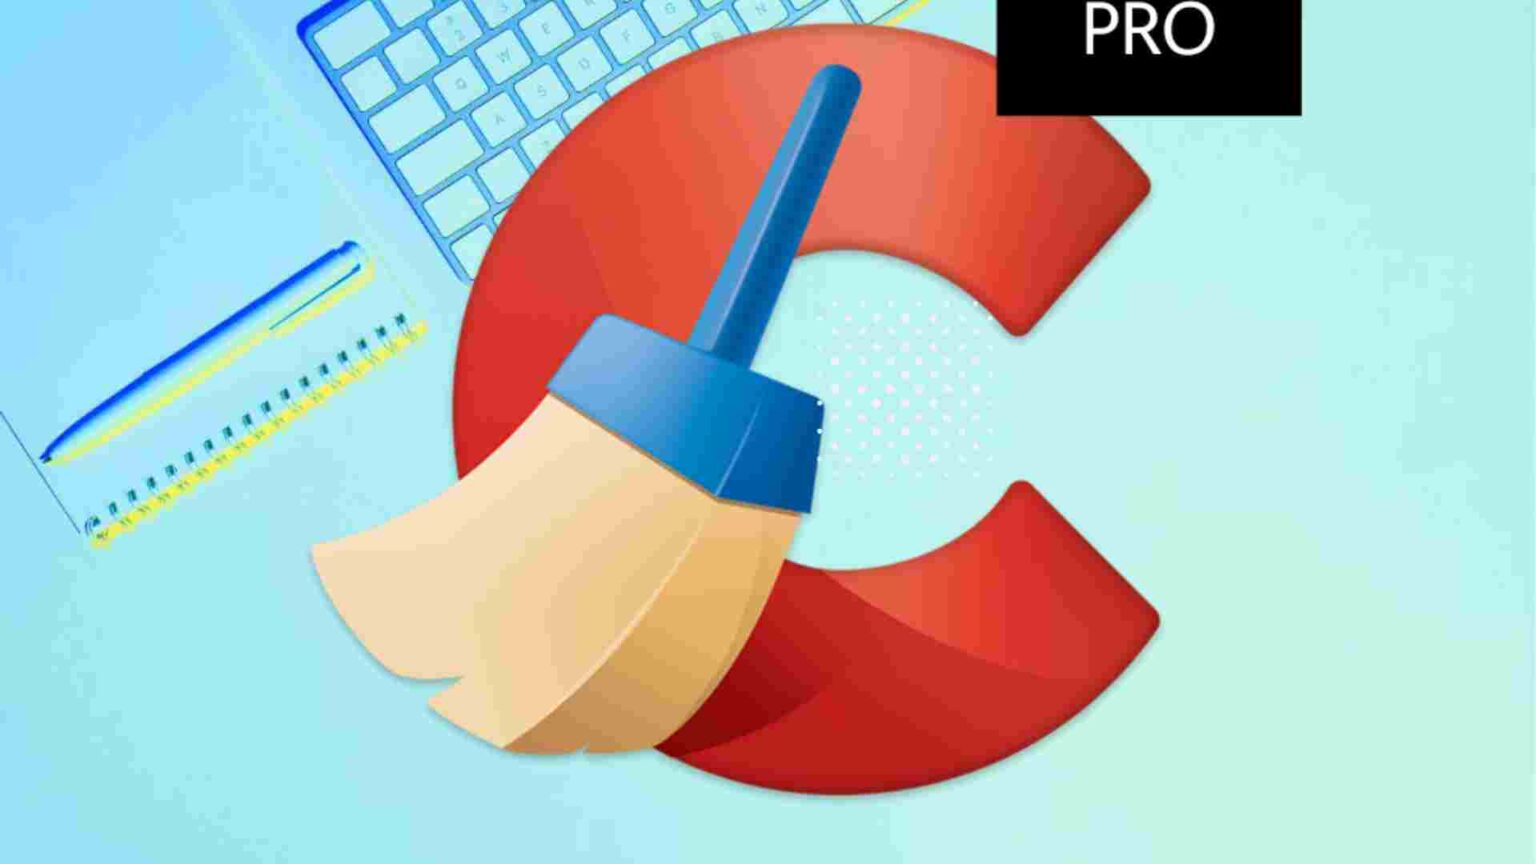 CCleaner Pro APK v5.6.1 (MOD, Premium) Latest Download Free on Android